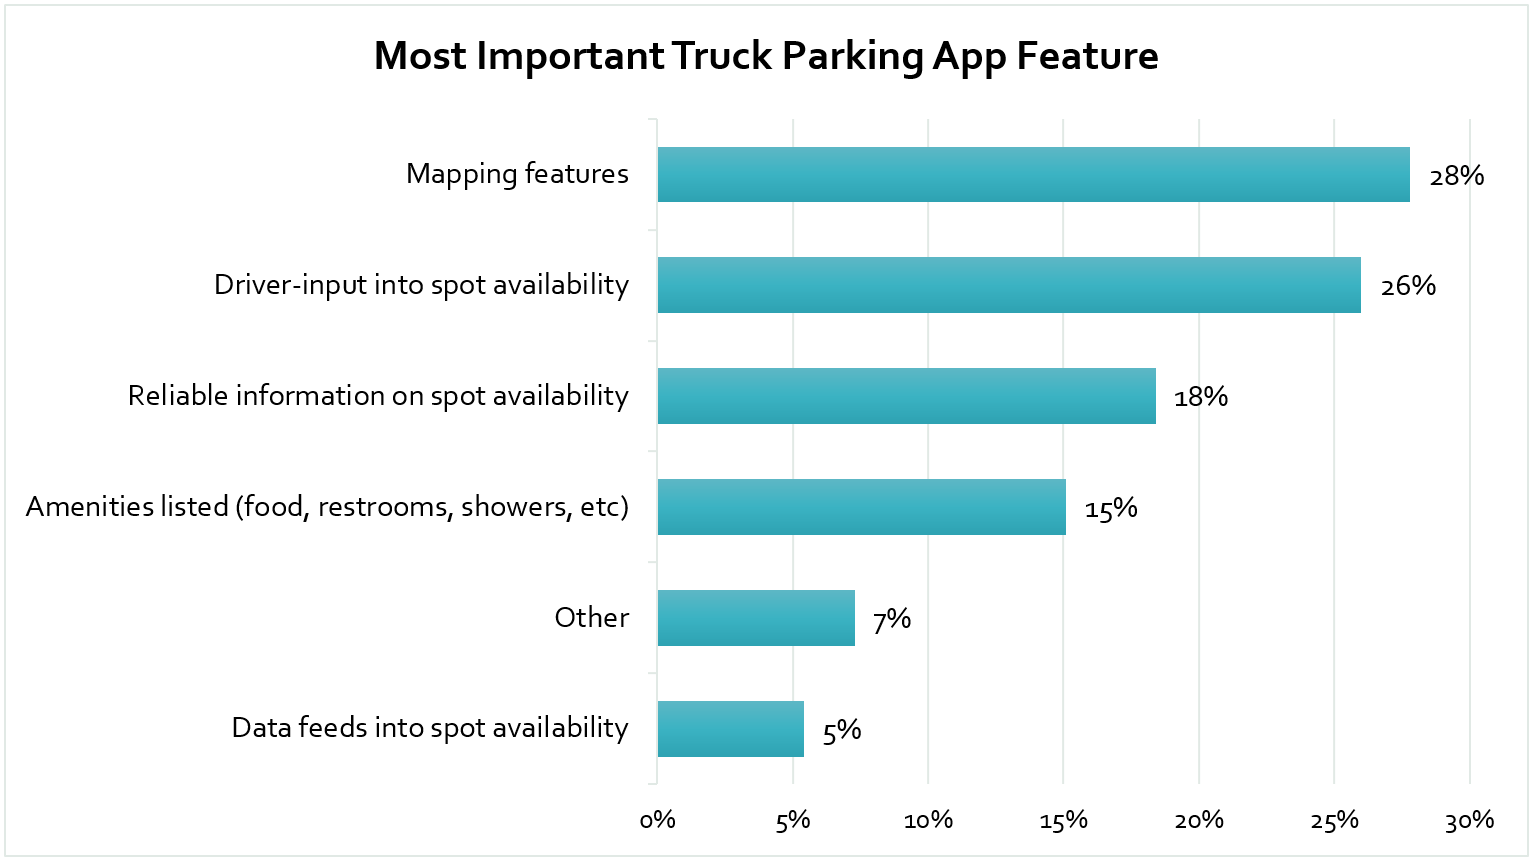 Most important parking app features: Mapping features (28%), Driver-input into spot availability (26%), Reliable information on spot availability (18%), Amenities listed (food, restrooms, showers, etc) (15%), Other (7%), and  Data feeds into spot availability (5%).